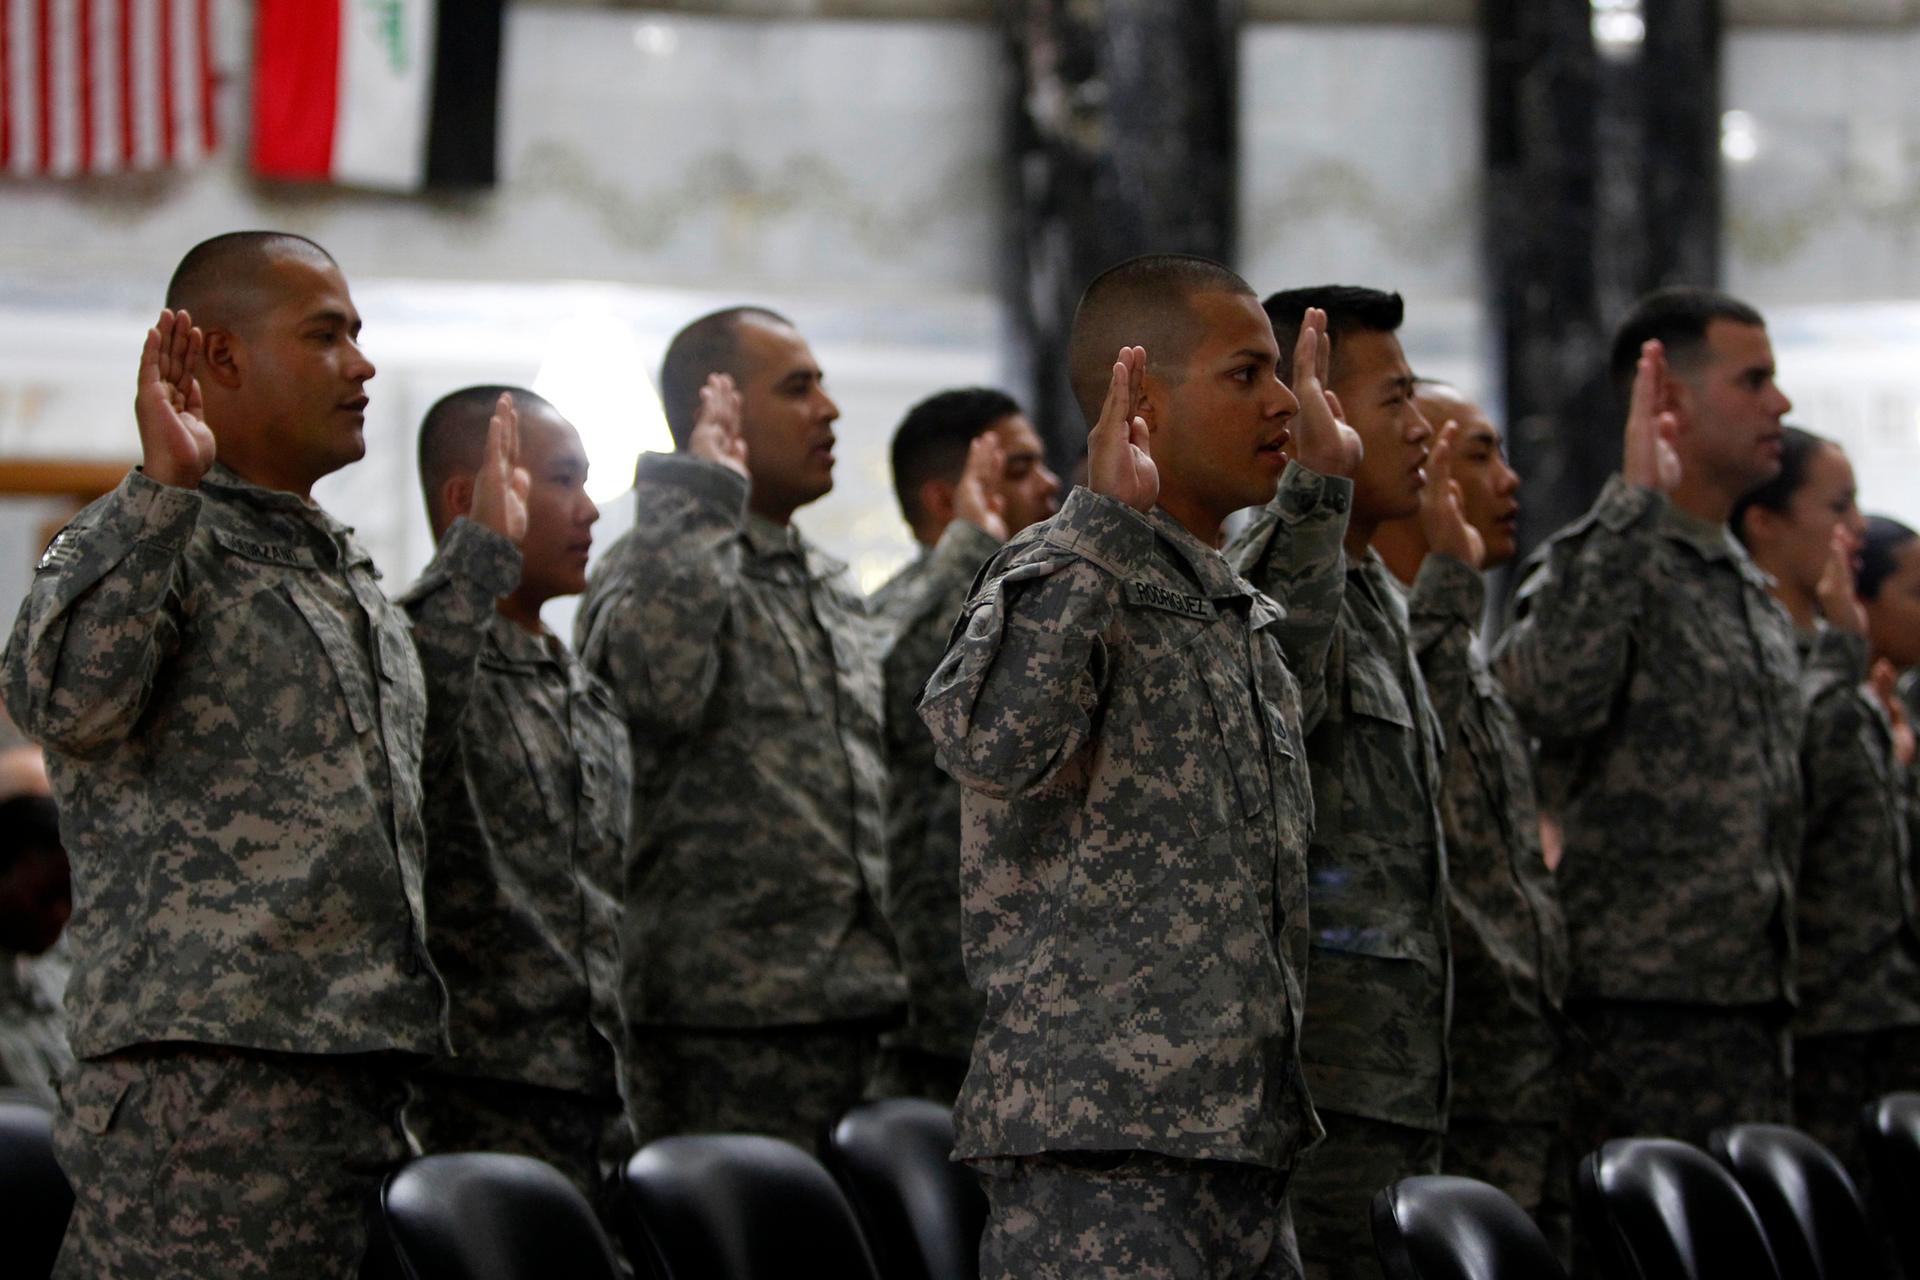 Servicemen from the US military take an oath during a naturalization ceremony at the Al-Faw Palace in Baghdad's Camp Victory on July 4, 2011.